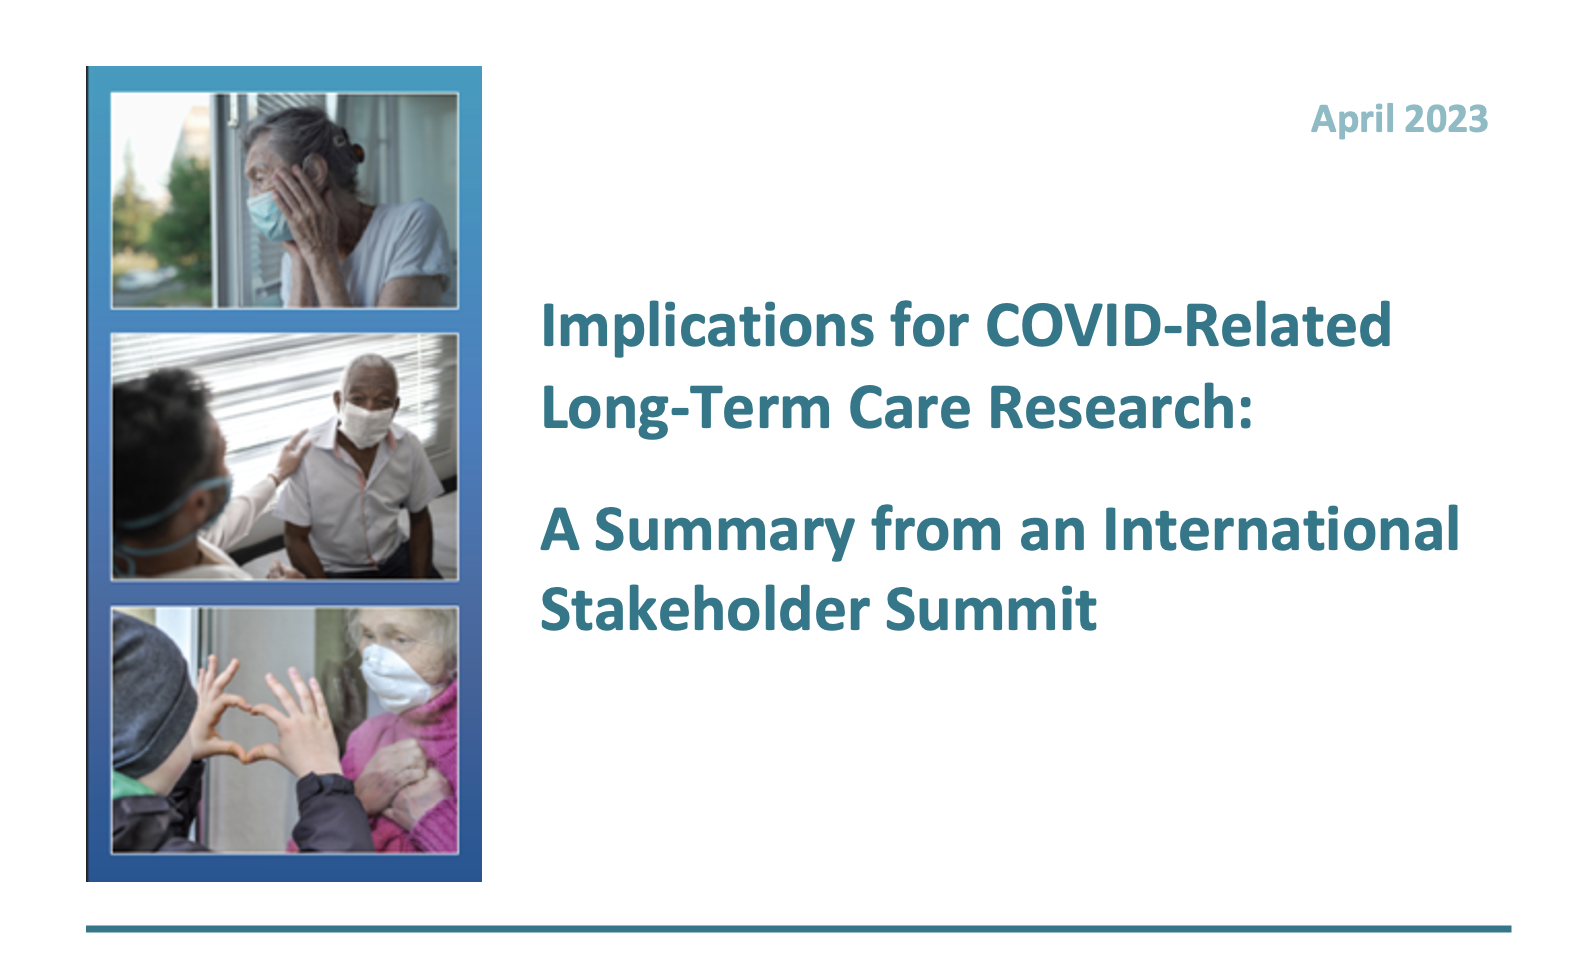 Cover of Implications for COVID-Related Long-Term Care Research from International Stakeholder Summit